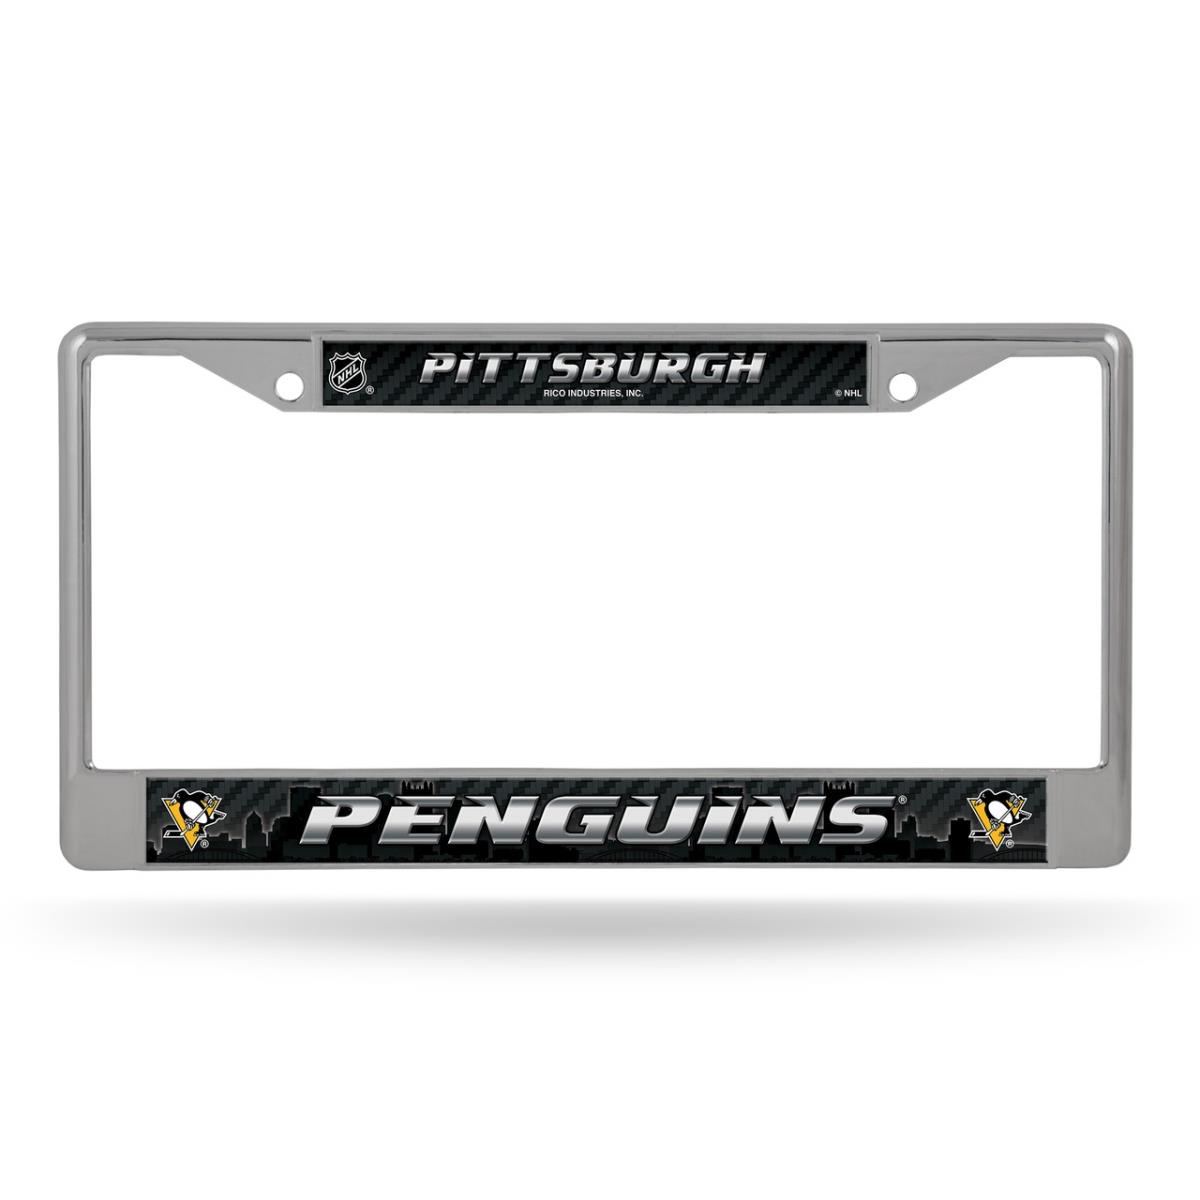 Picture of Rico Industries 6734524161 NHL Pittsburgh Penguins Frame Chrome License Plate